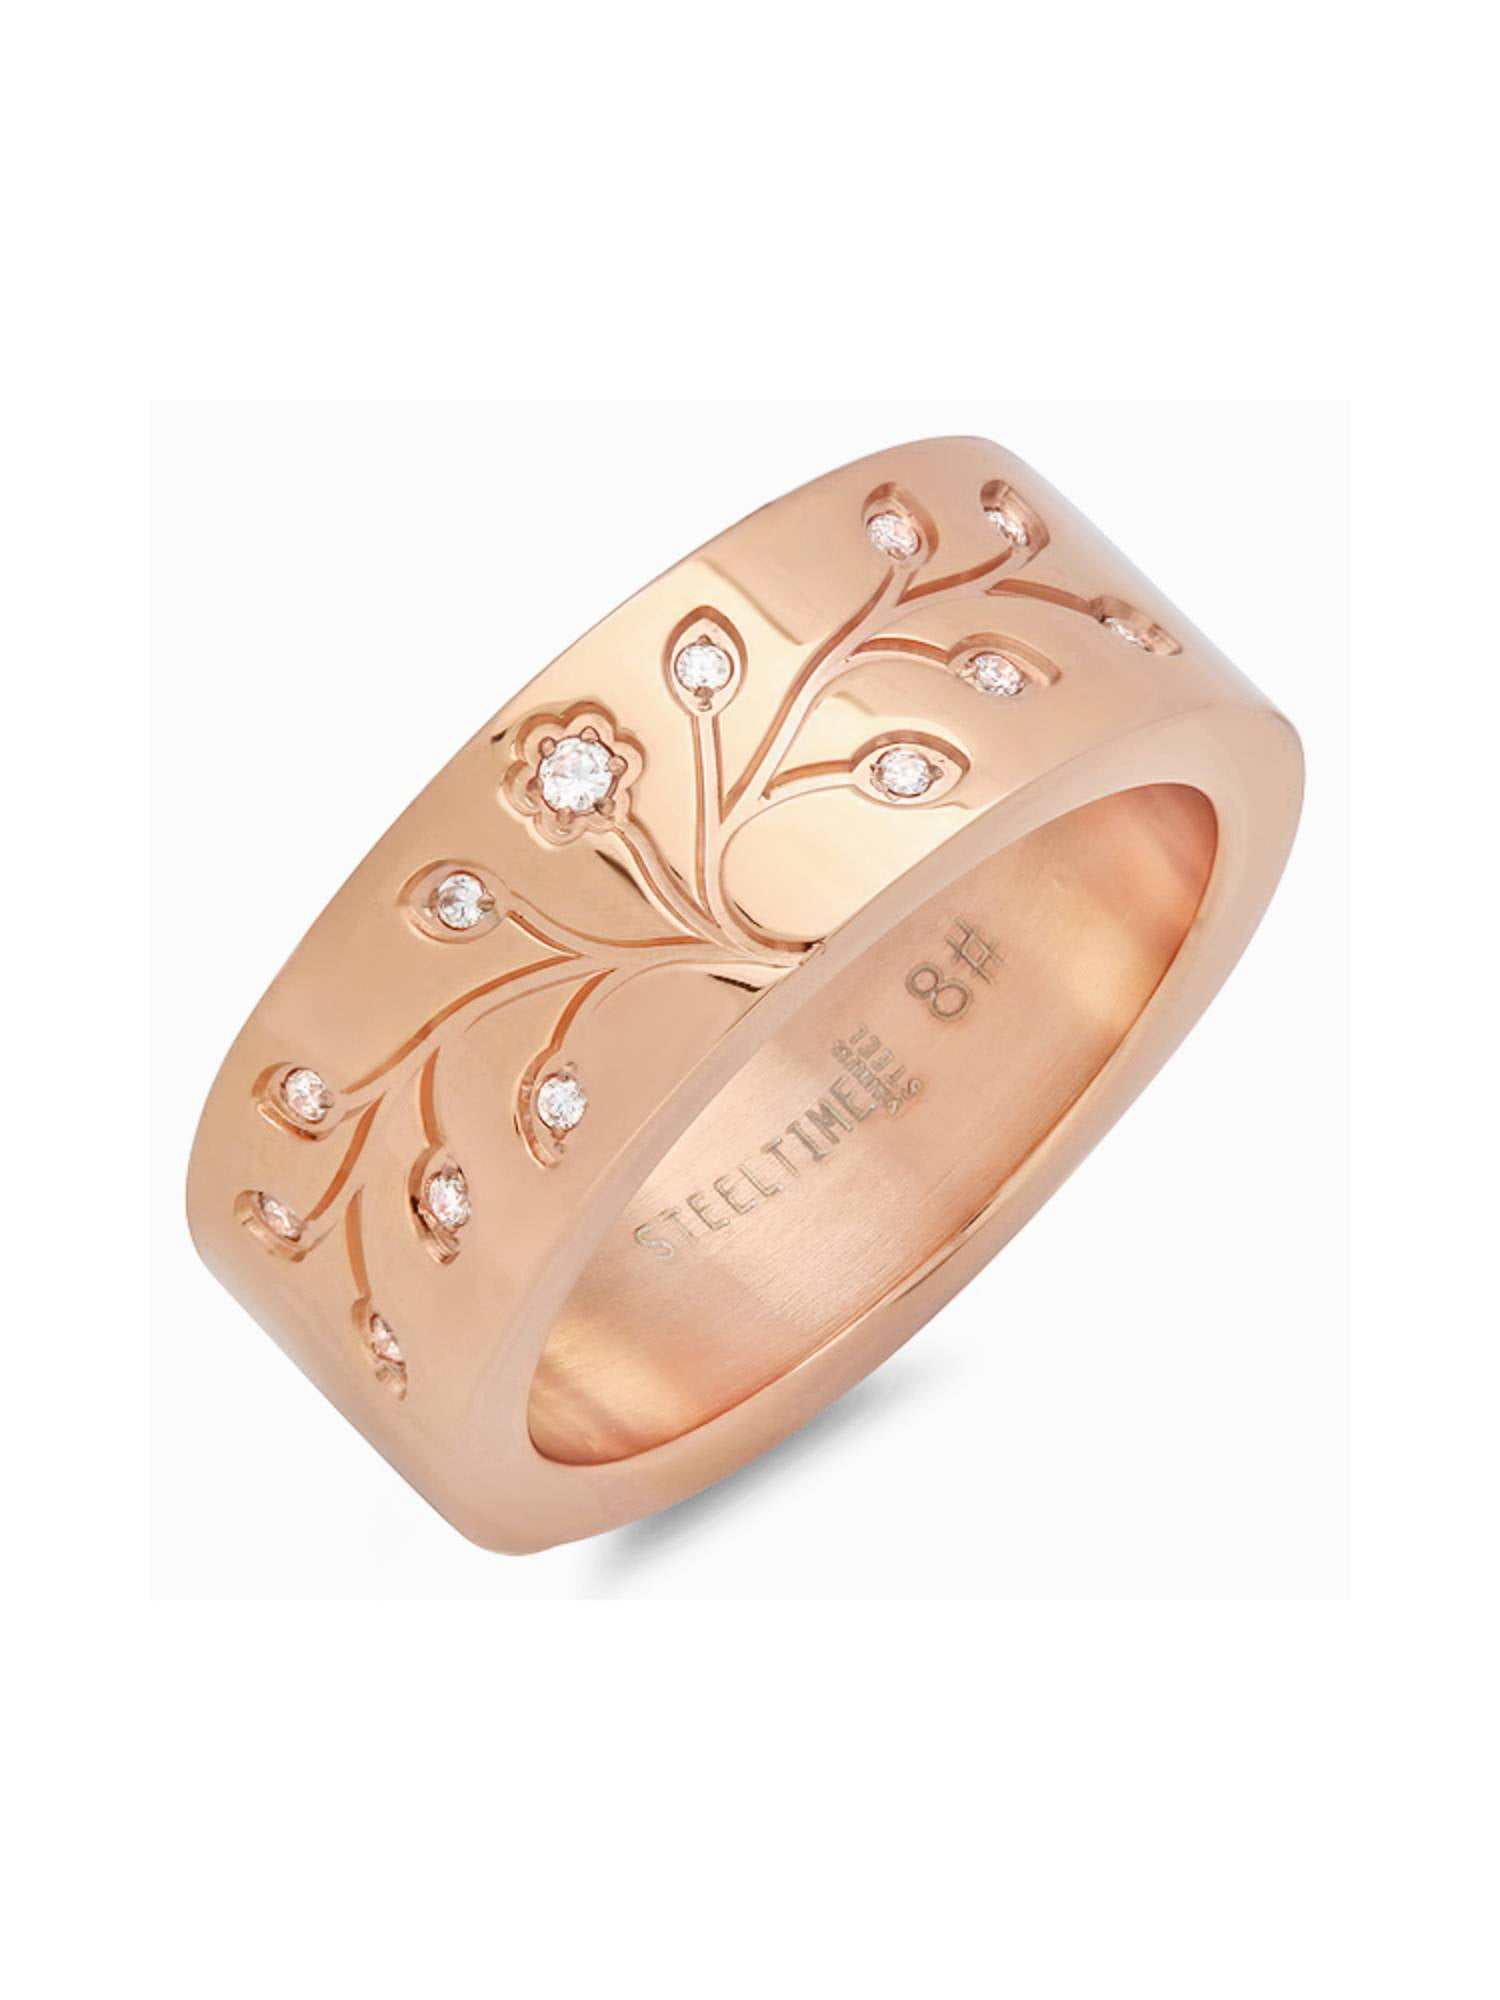 Gem Stone King Stainless Steel Rose Gold Tone Tree of Life Men's Band Ring with CZ 8mm Wide